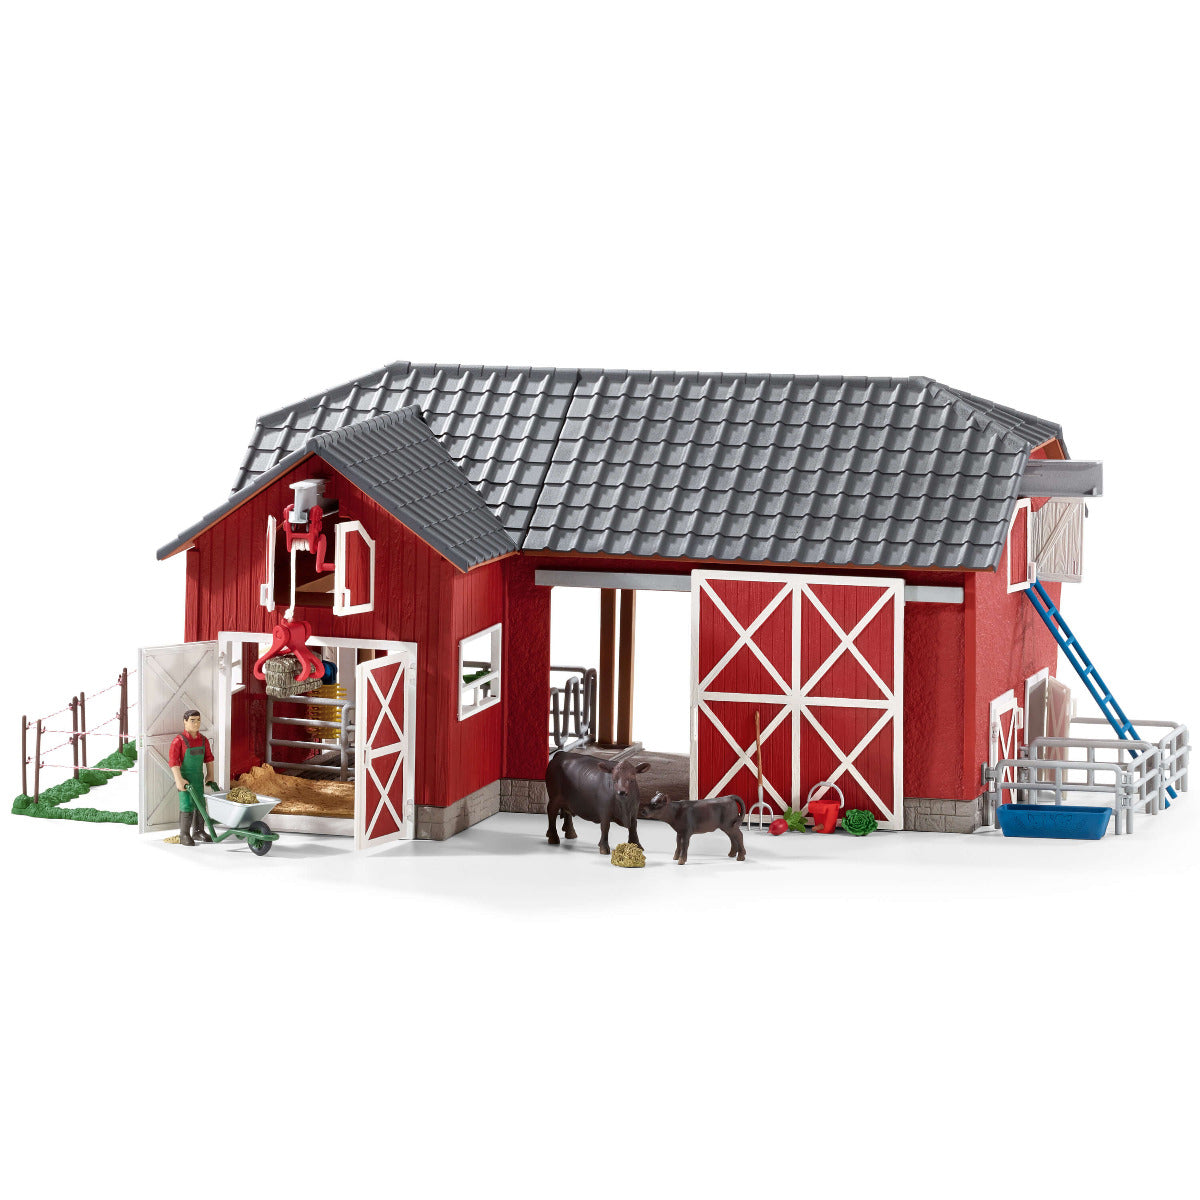 Large Red Barn Farm with Black Angus Animals & Accessories (Schleich #72102)